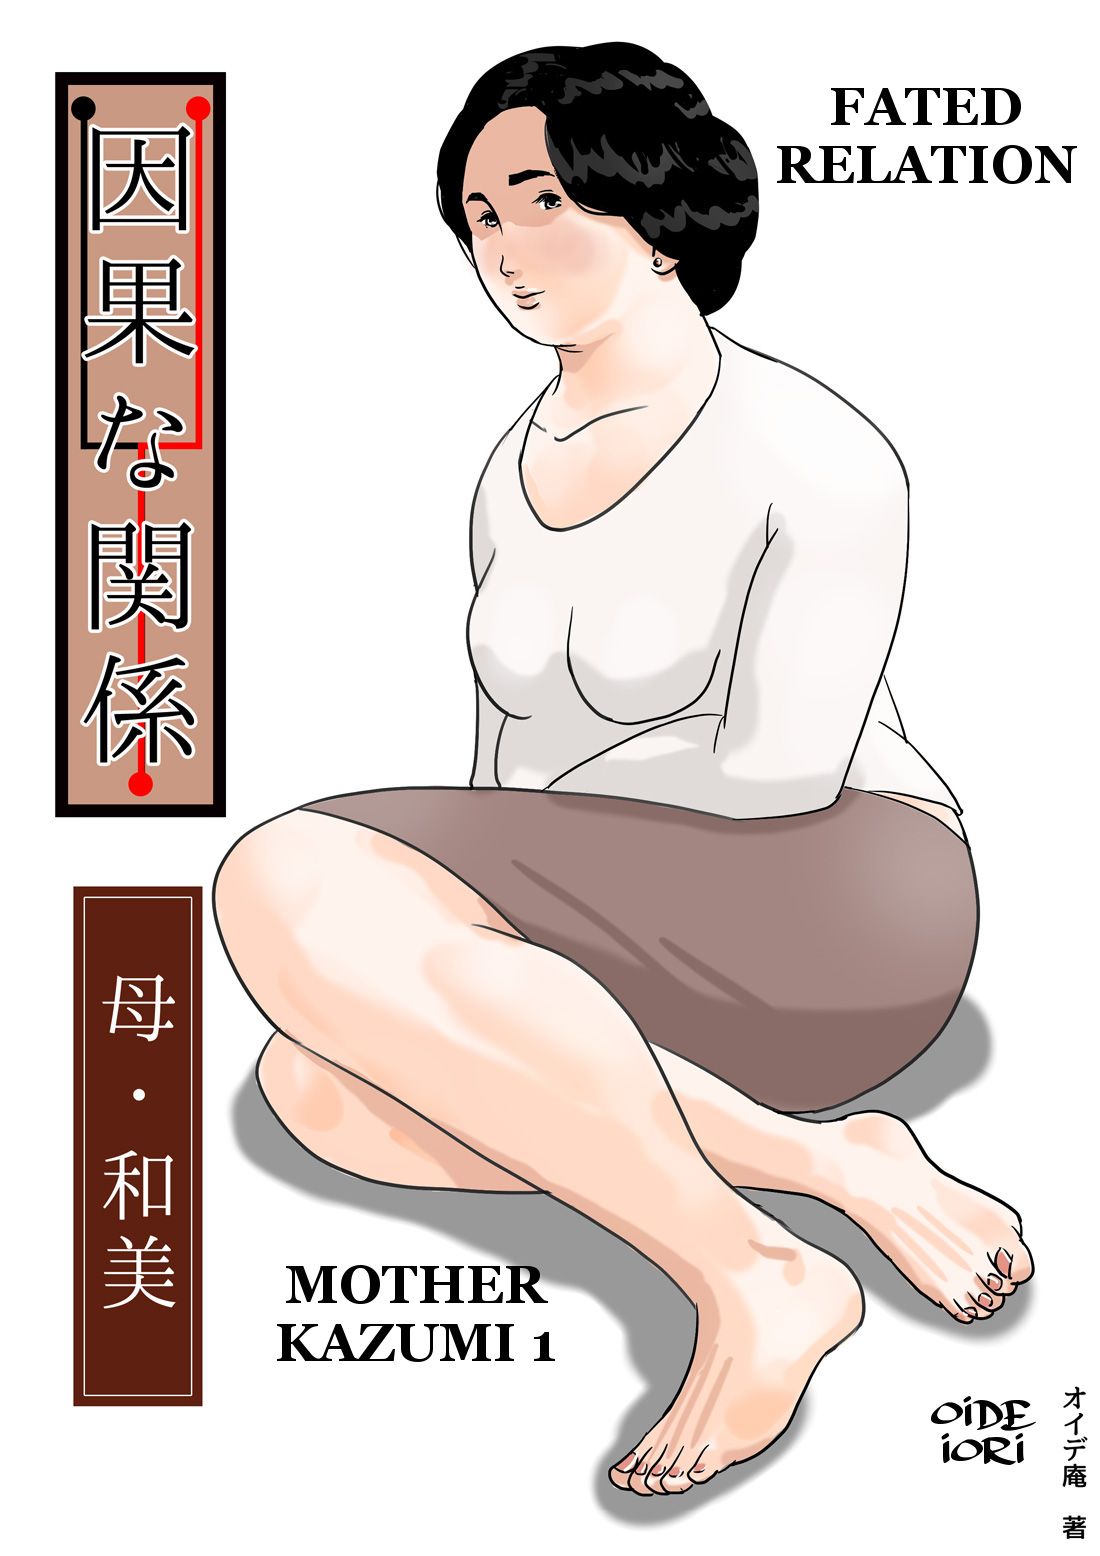 Fated Relation Mother Kazumi 1 - 0